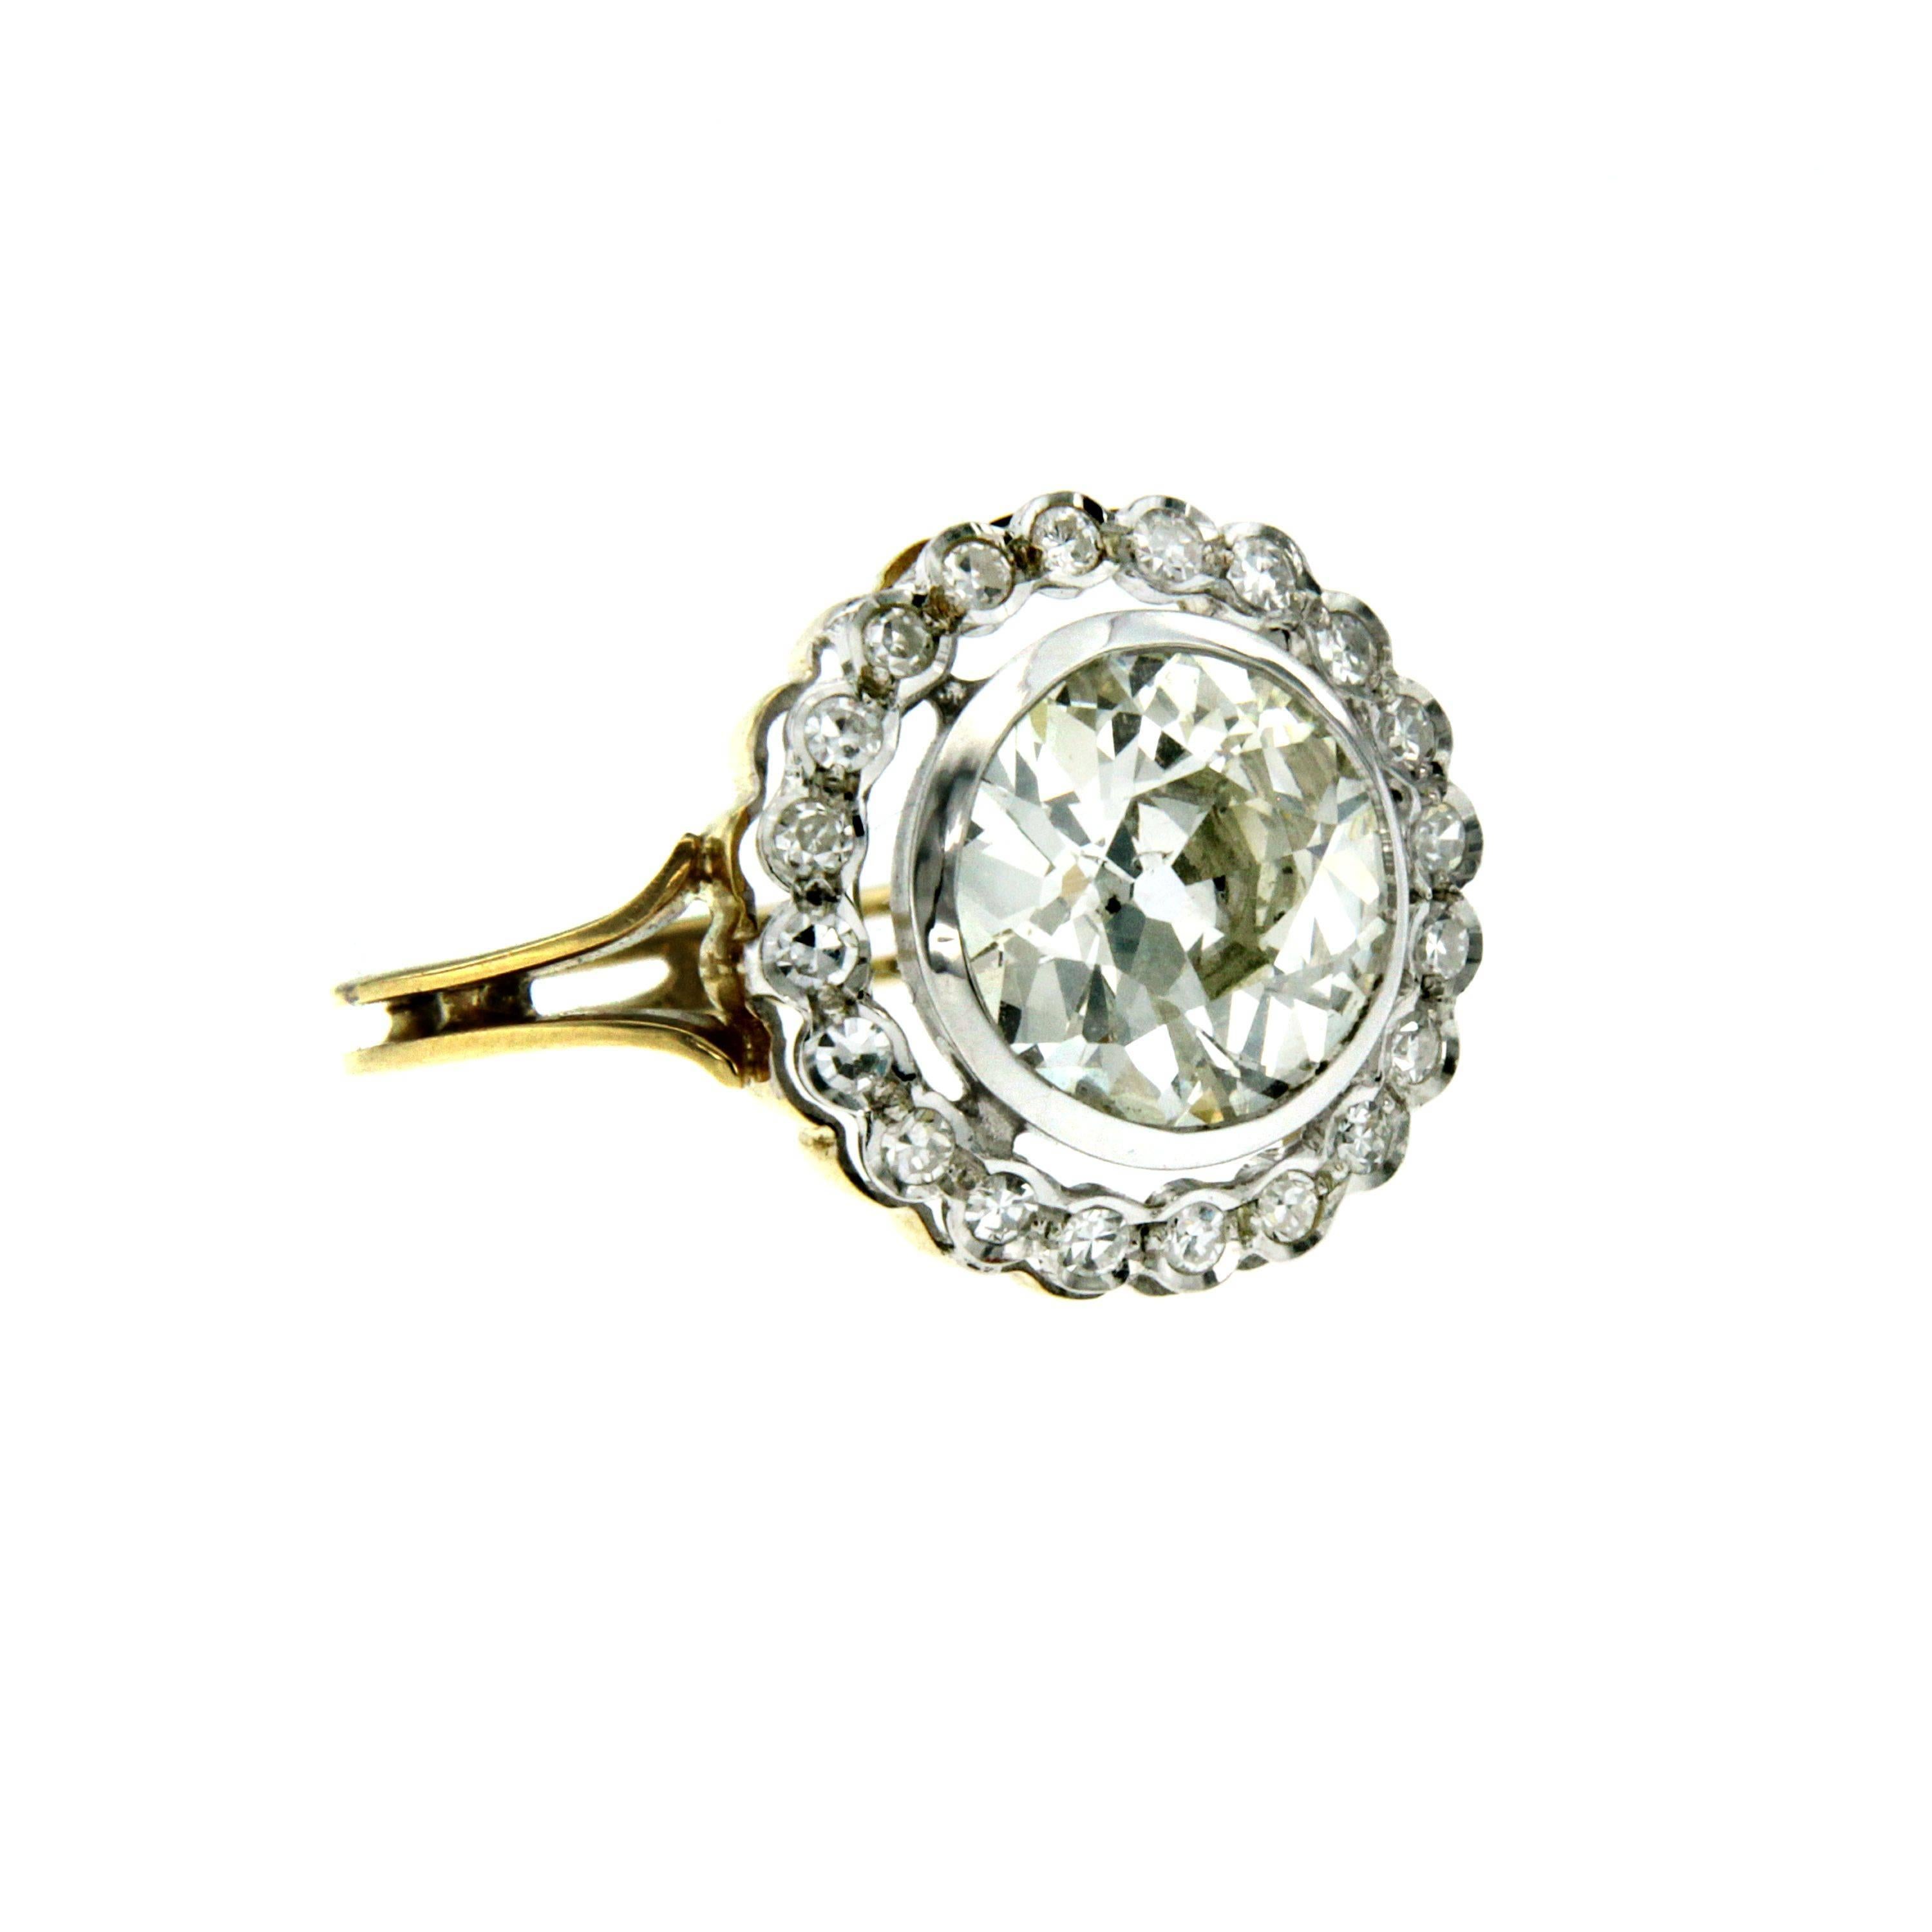 A beautiful Victorian style diamond engagement ring set in 18K yellow and white gold. The ring features a center 3.16 carat old mine cut diamond L color I2 clarity, framing the center diamond are .40ct of old mine cut diamonds.
Entirely hand